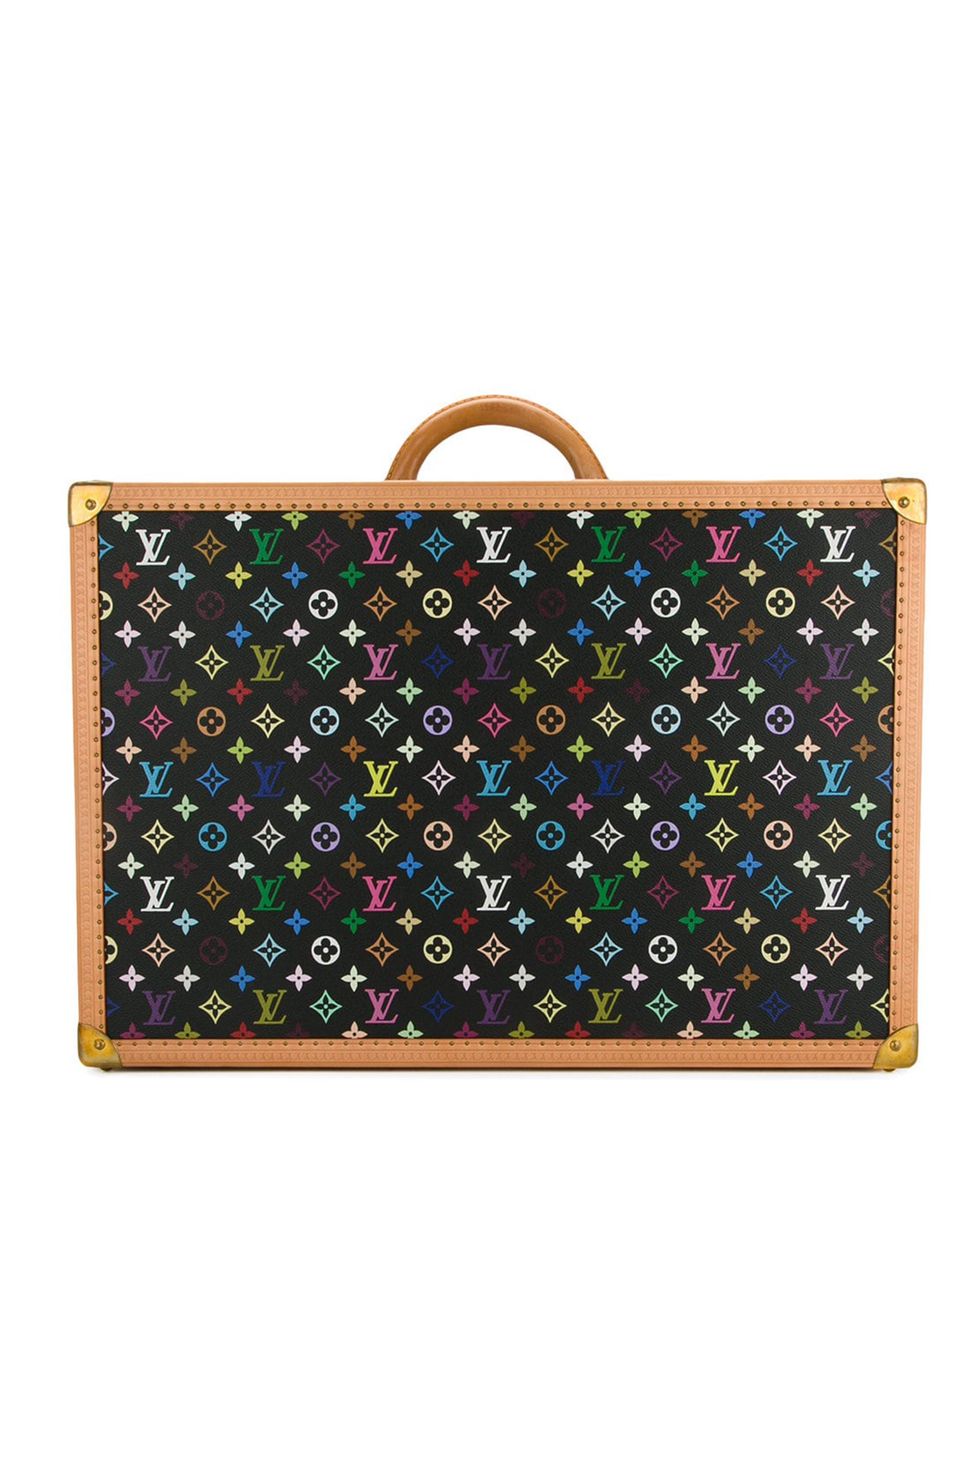 Luxury  Louis vuitton, Gifts, Gift wrapping